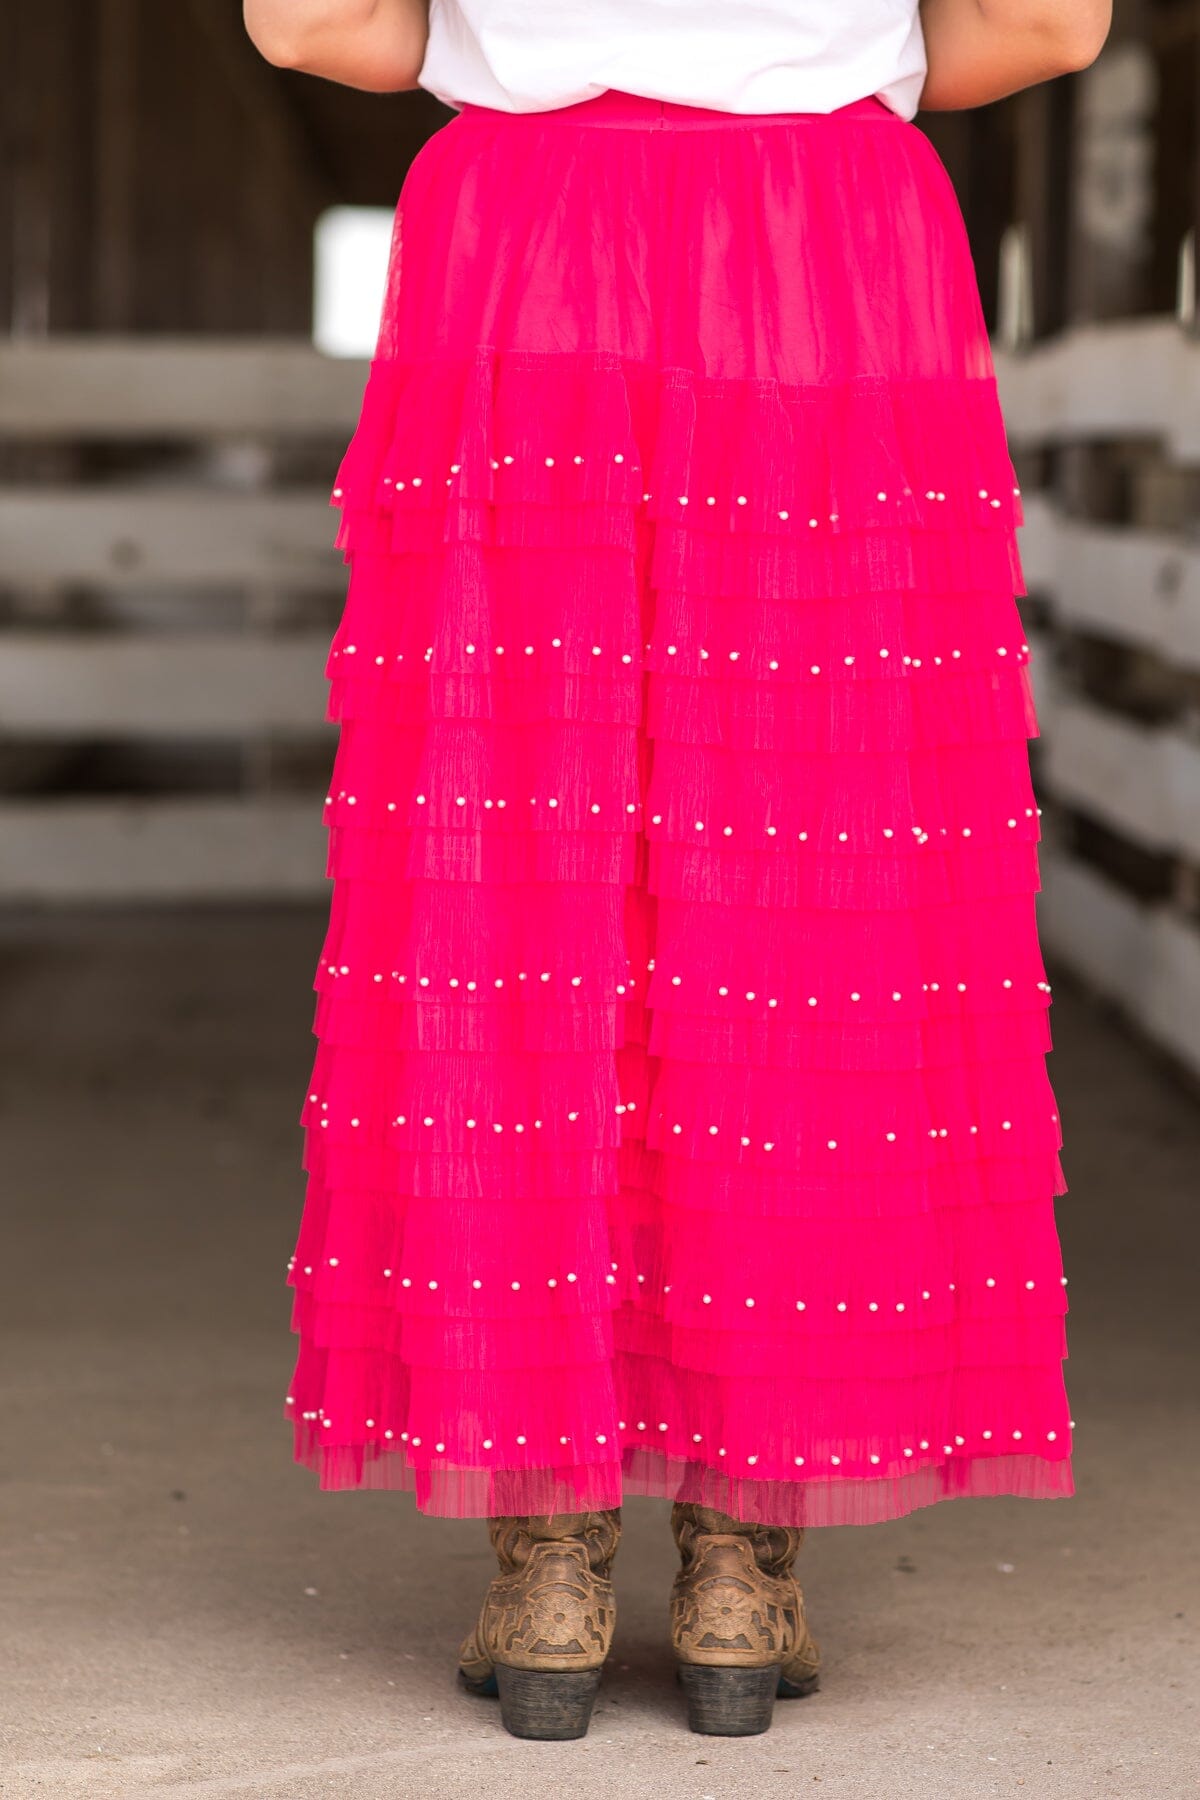 Hot Pink Tulle Midi Skirt With Pearl Detail - Filly Flair